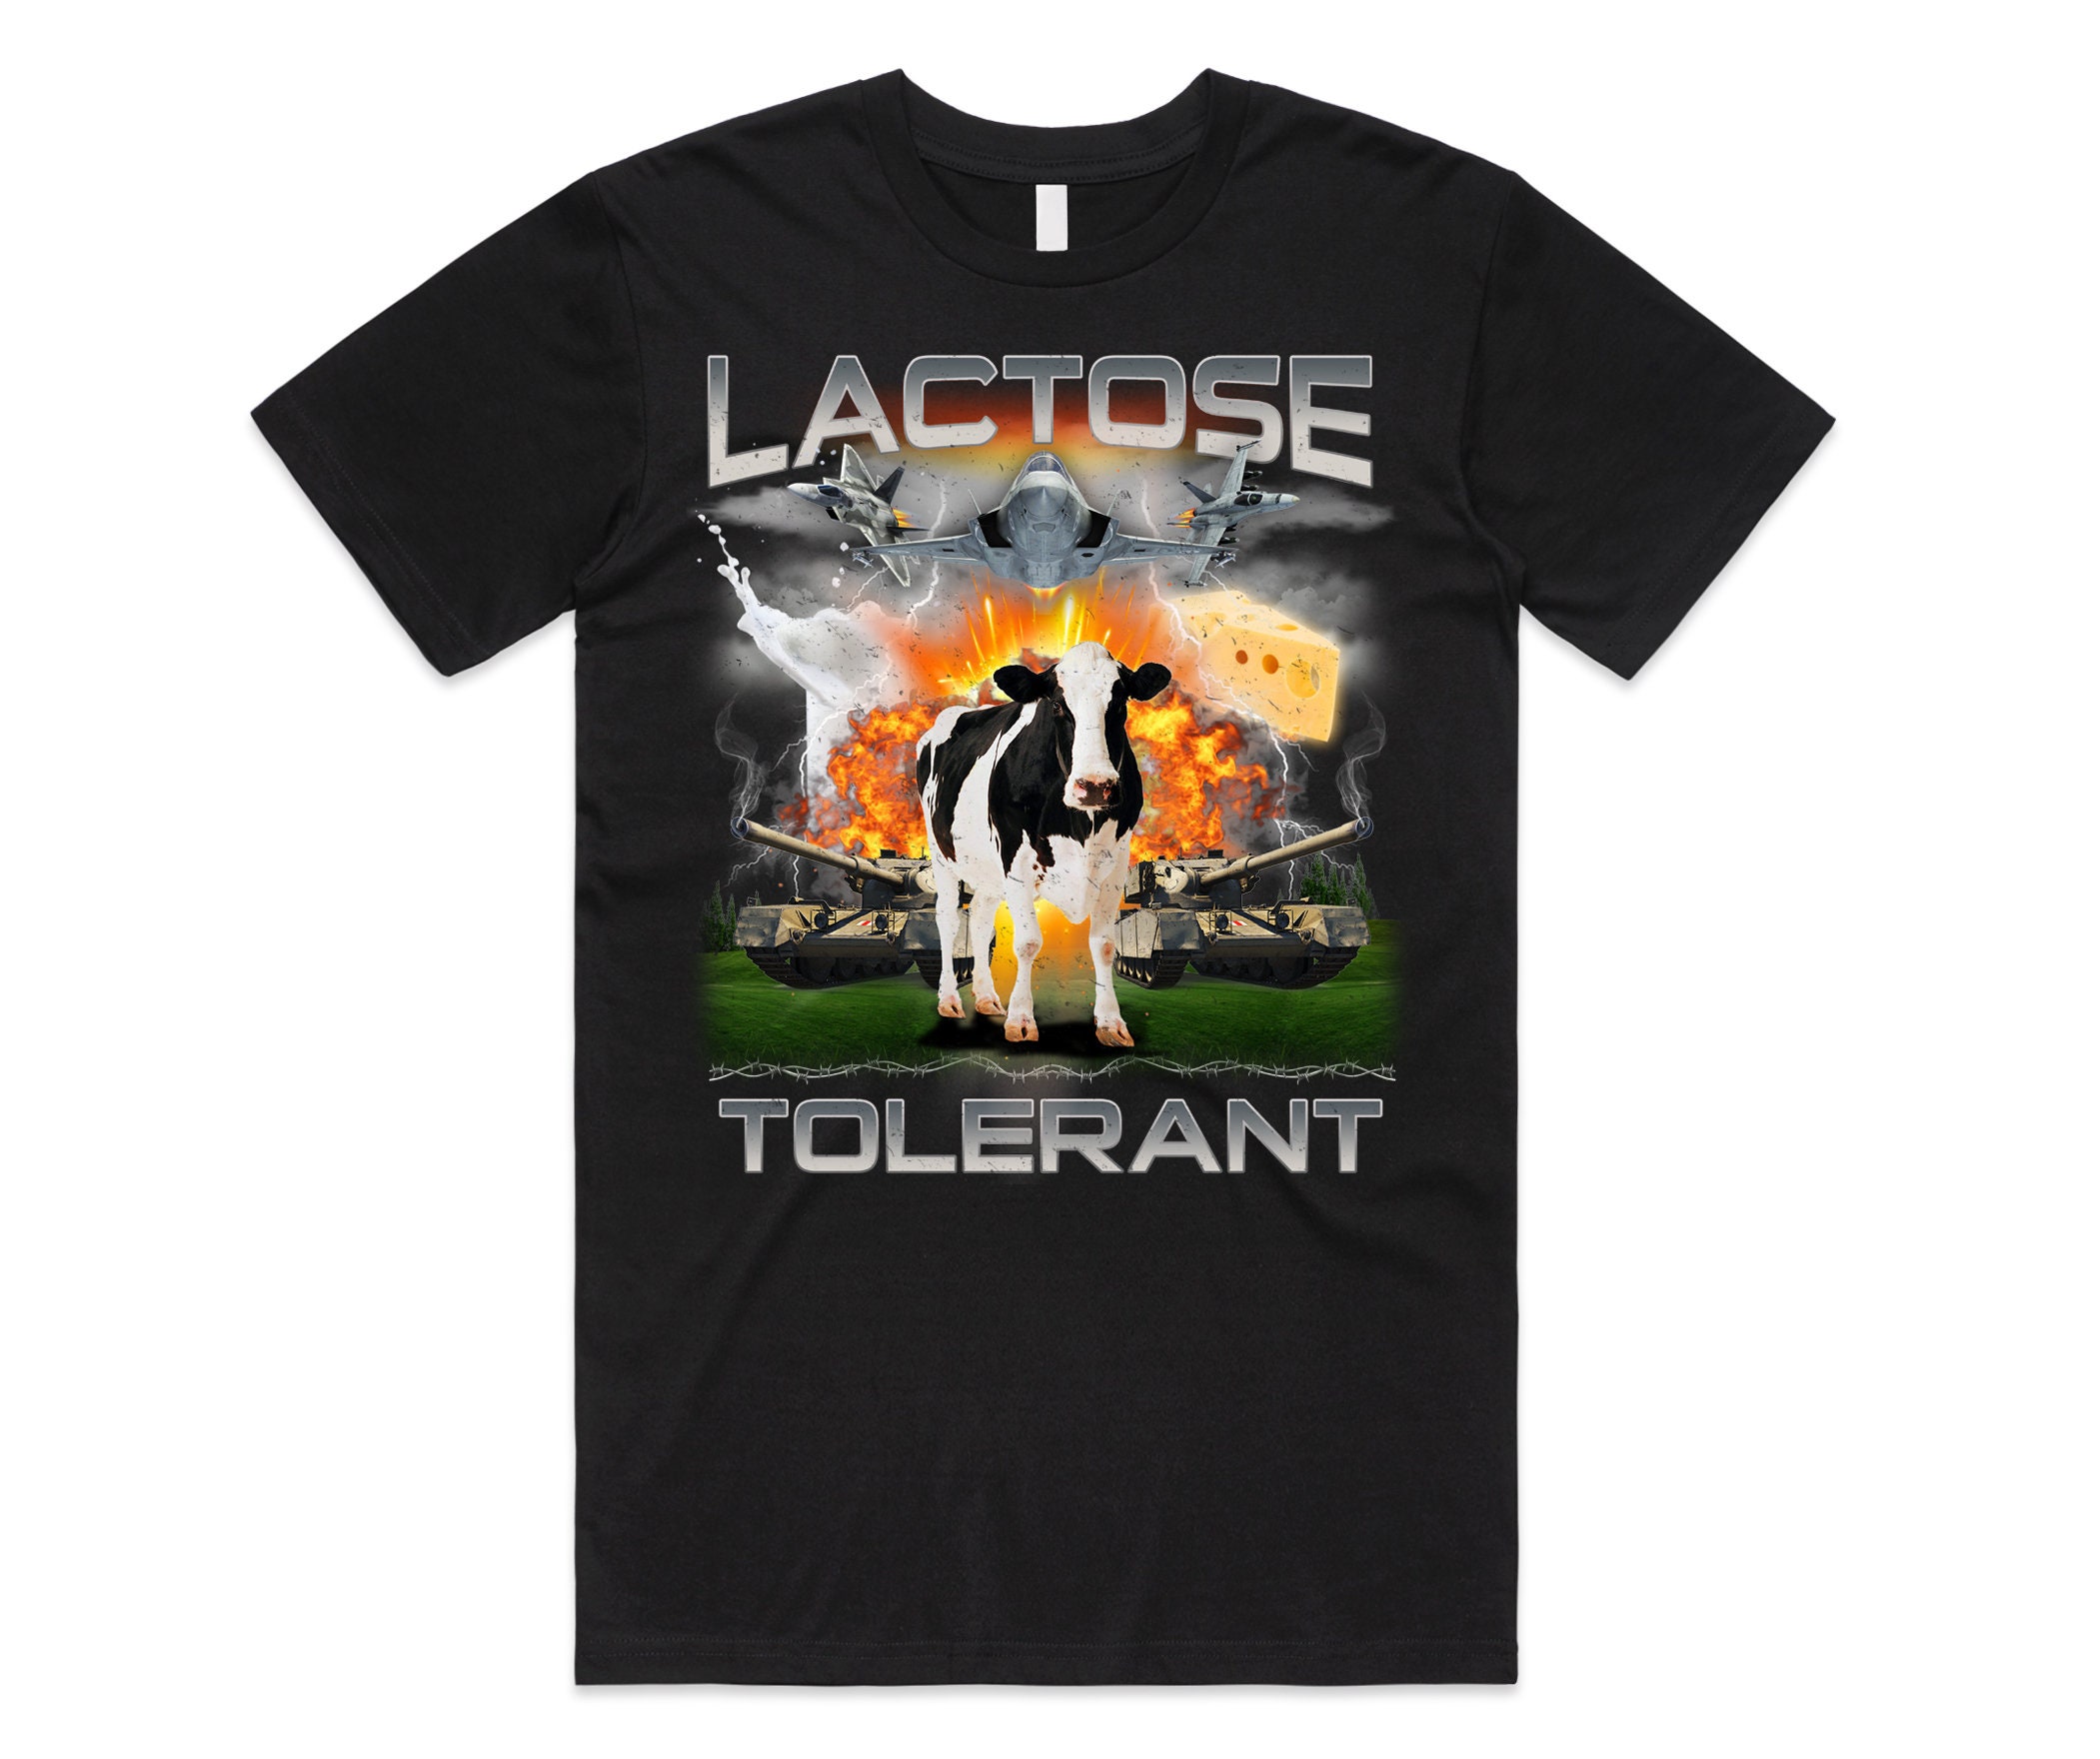 Lactose Tolerant T-Shirt Tee Top Funny Meme Milk Cheese Diet Gym Workout Gift Unisex